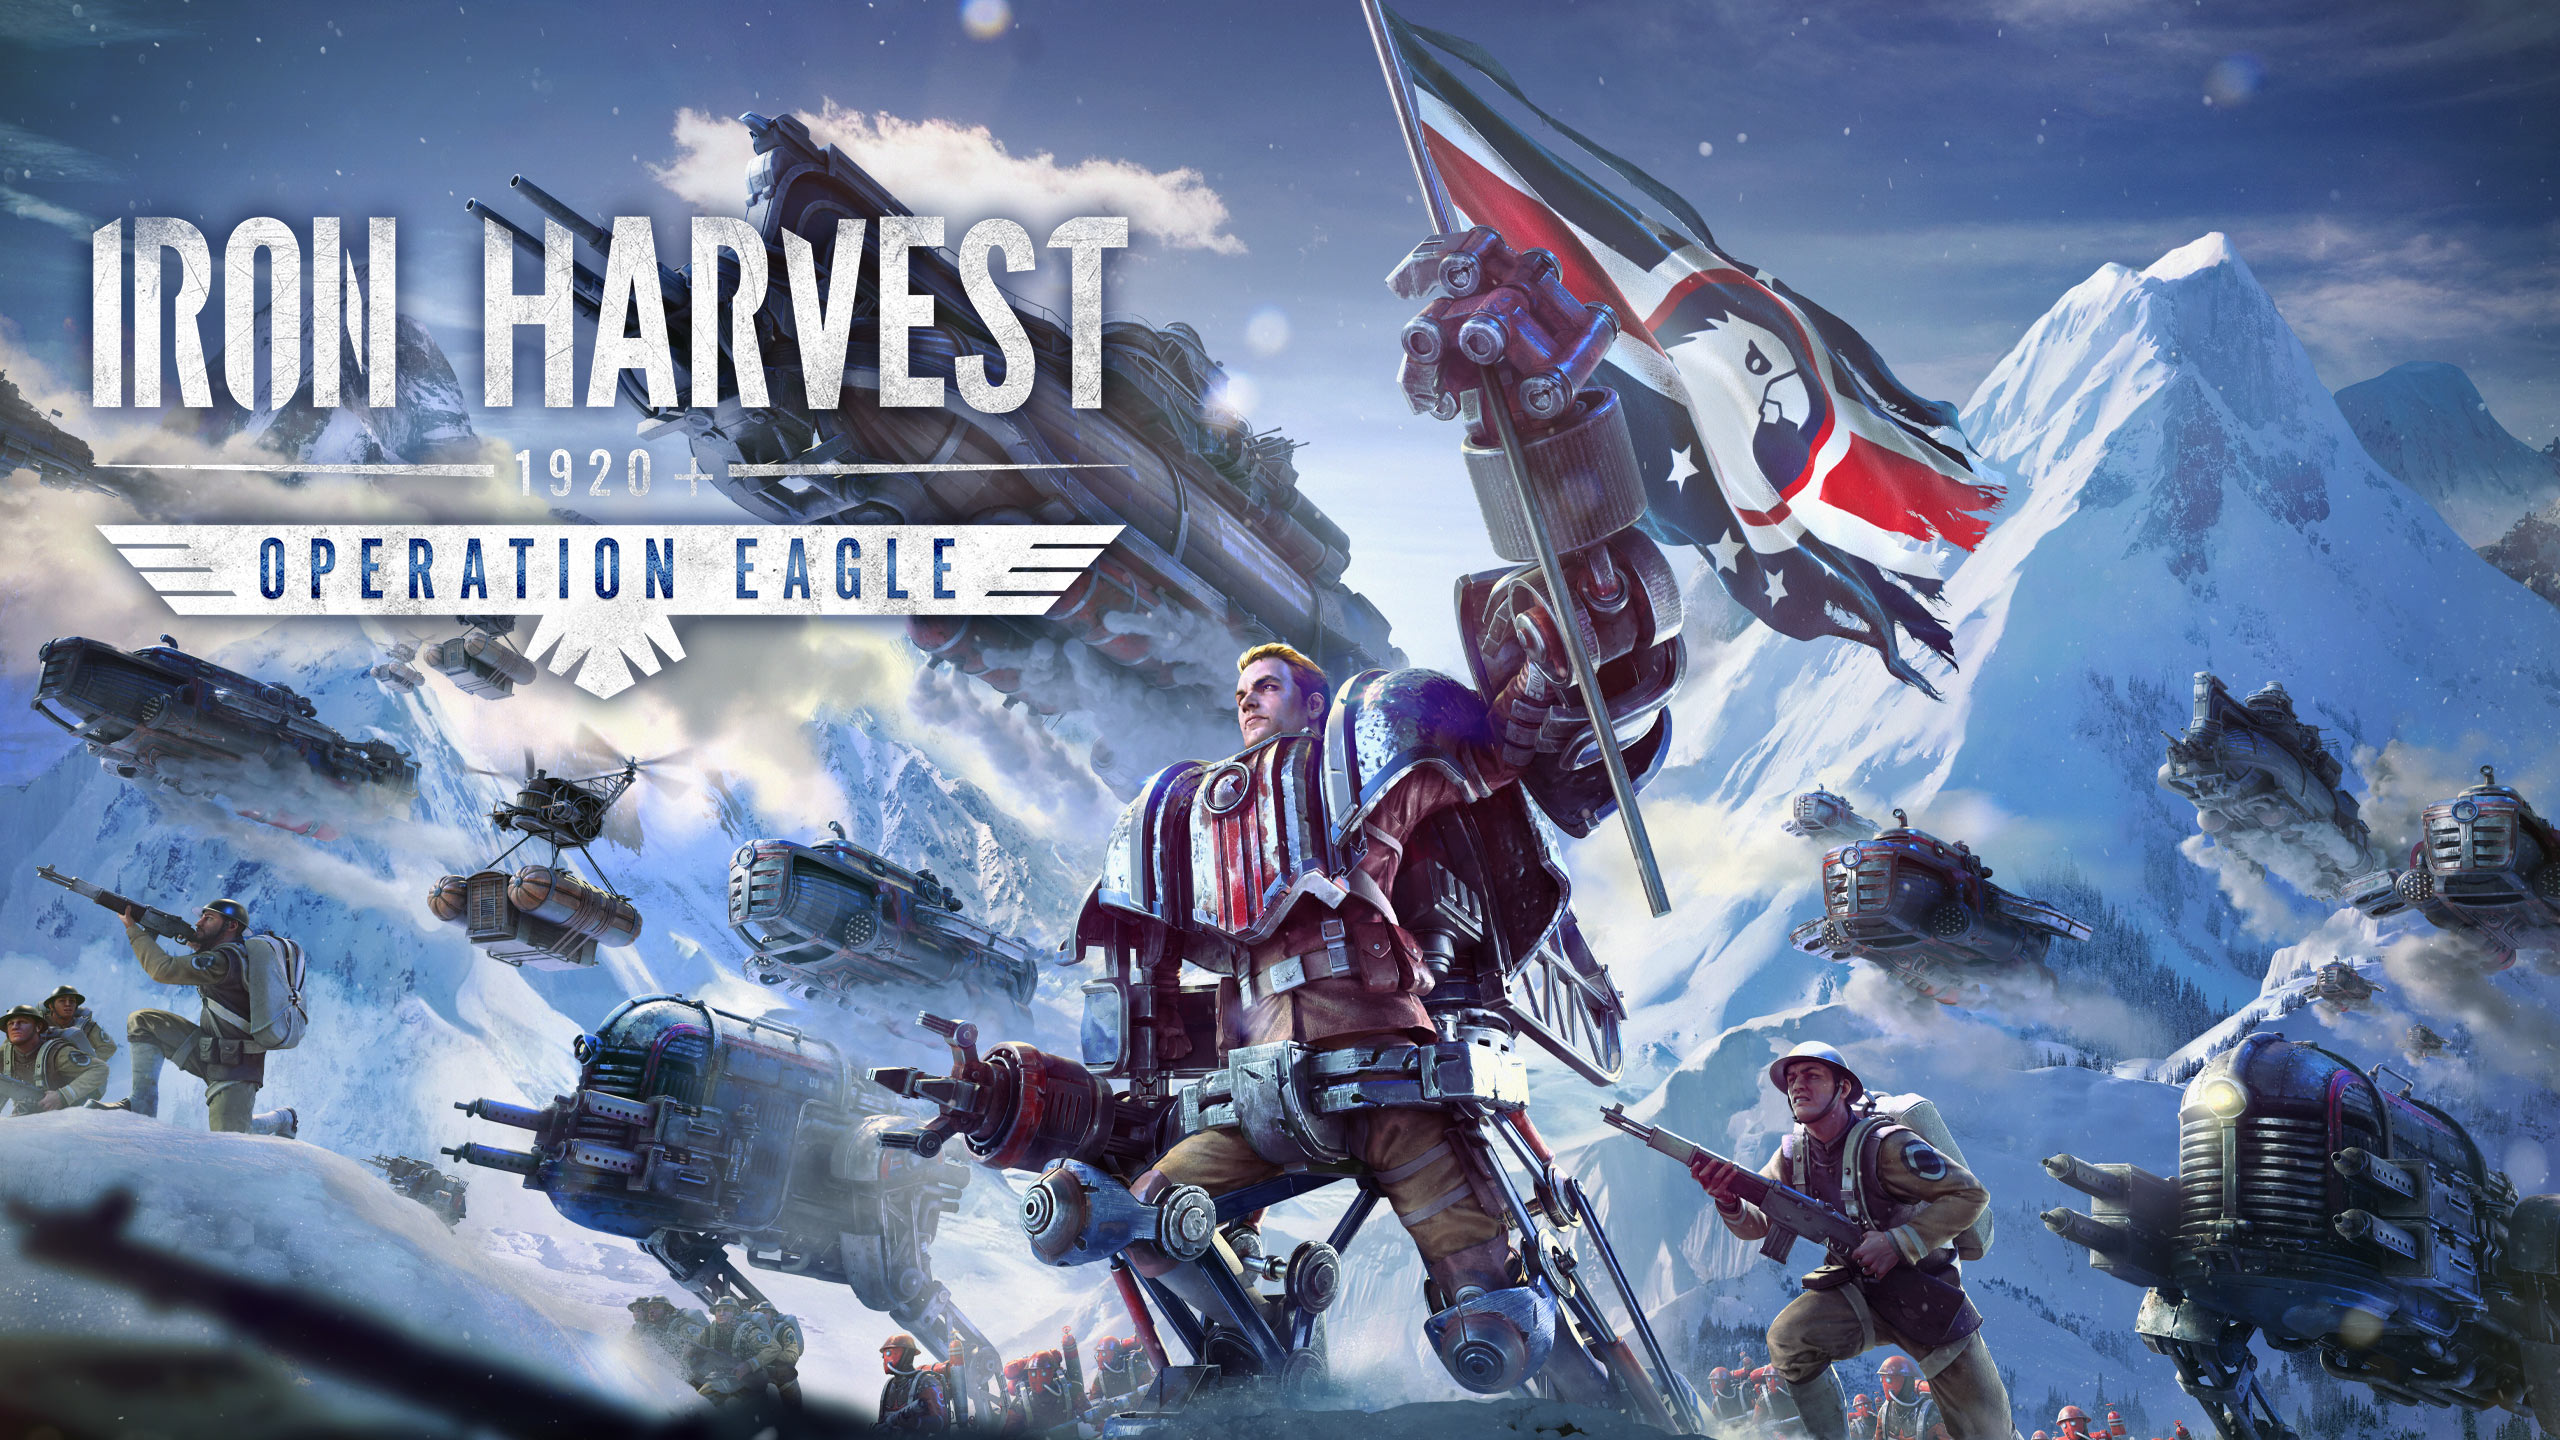 Iron Harvest 1920+ Saxony Faction Wallpapers